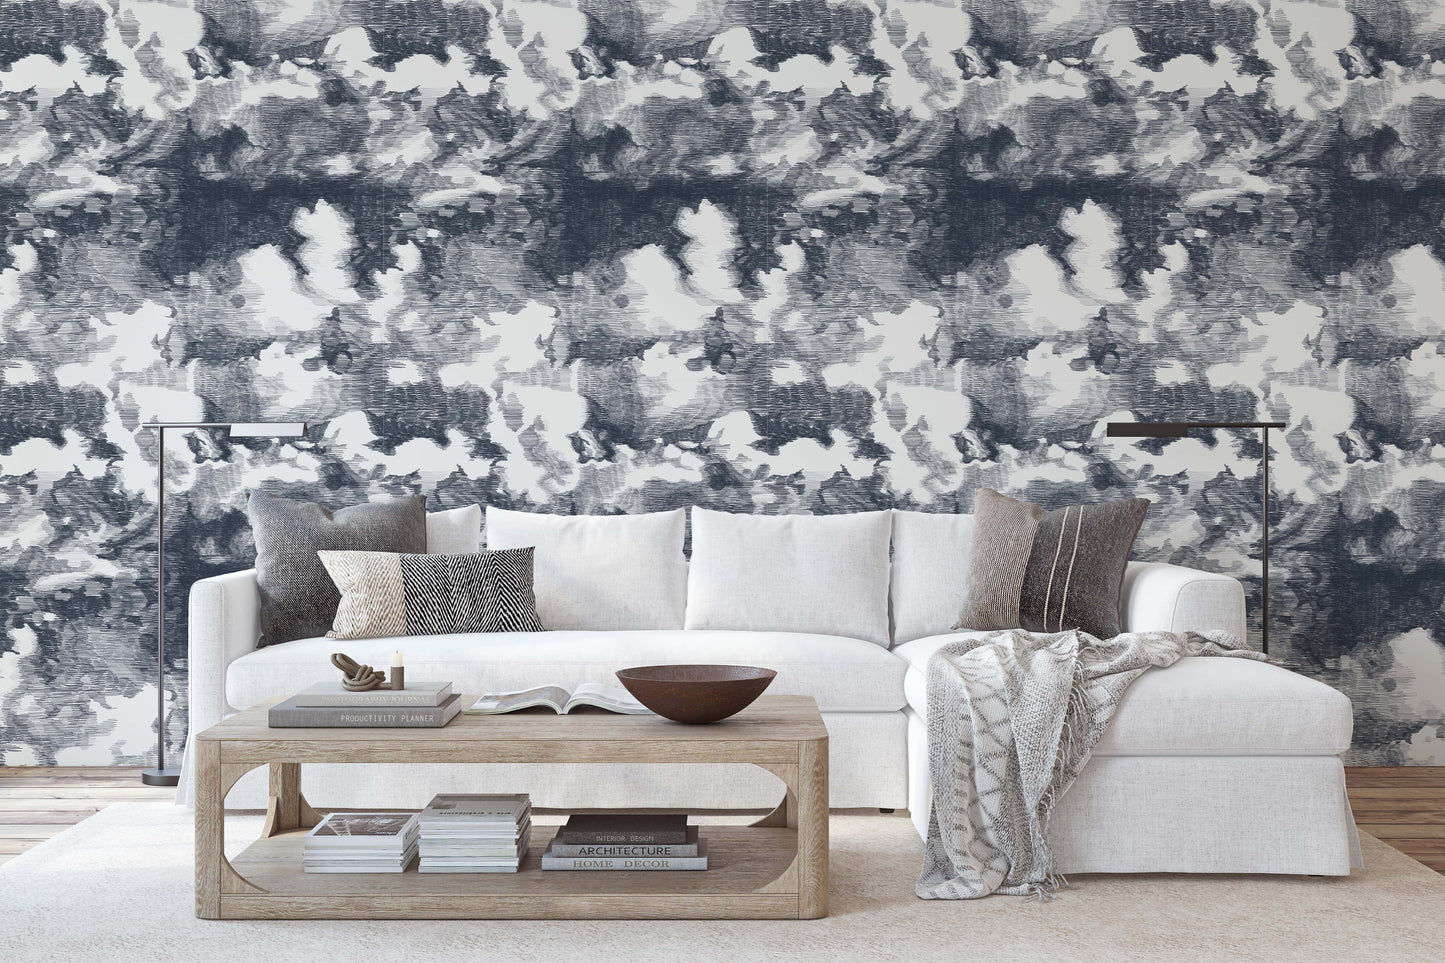 Navy blue and white puffy clouds pattern easy to install and remove peel and stick custom wallpaper available in different lengths/sizes locally created and printed in Canada Artichoke wallpaper. Washable, durable, commercial grade, removable and waterproof.